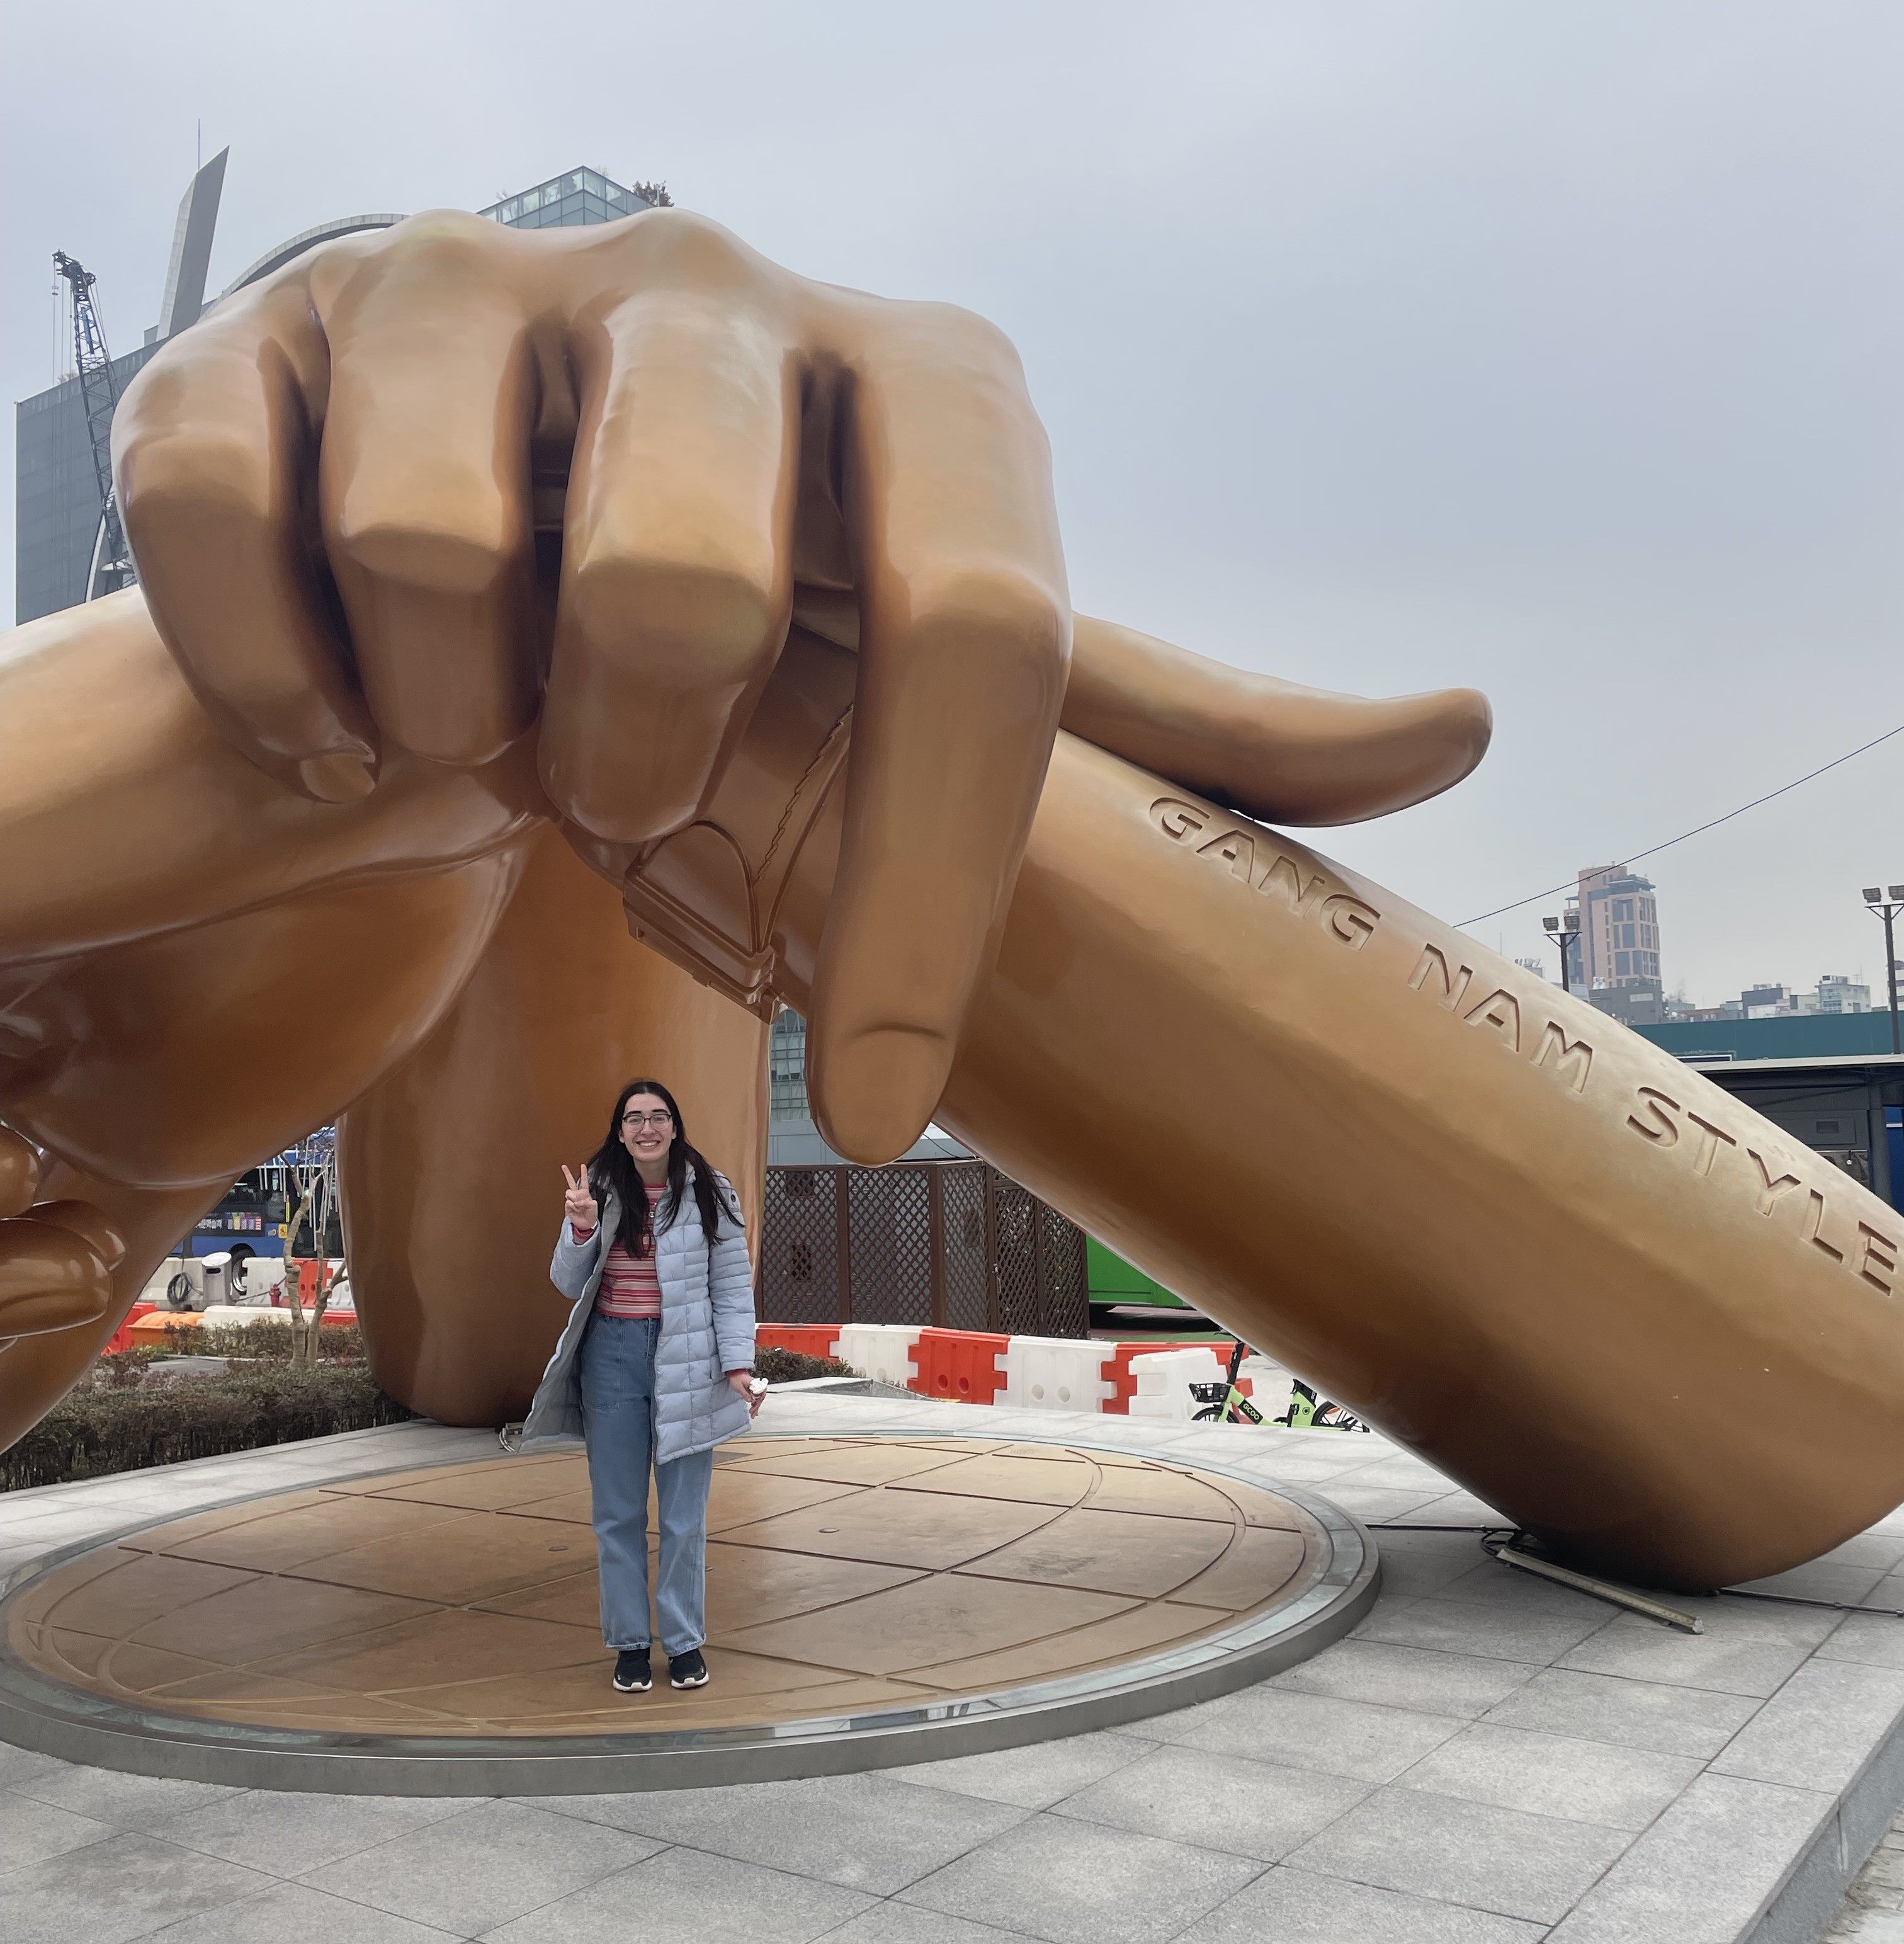 Alexis stands next to a bronze statue in the Gangnam district in Seoul South Korea.